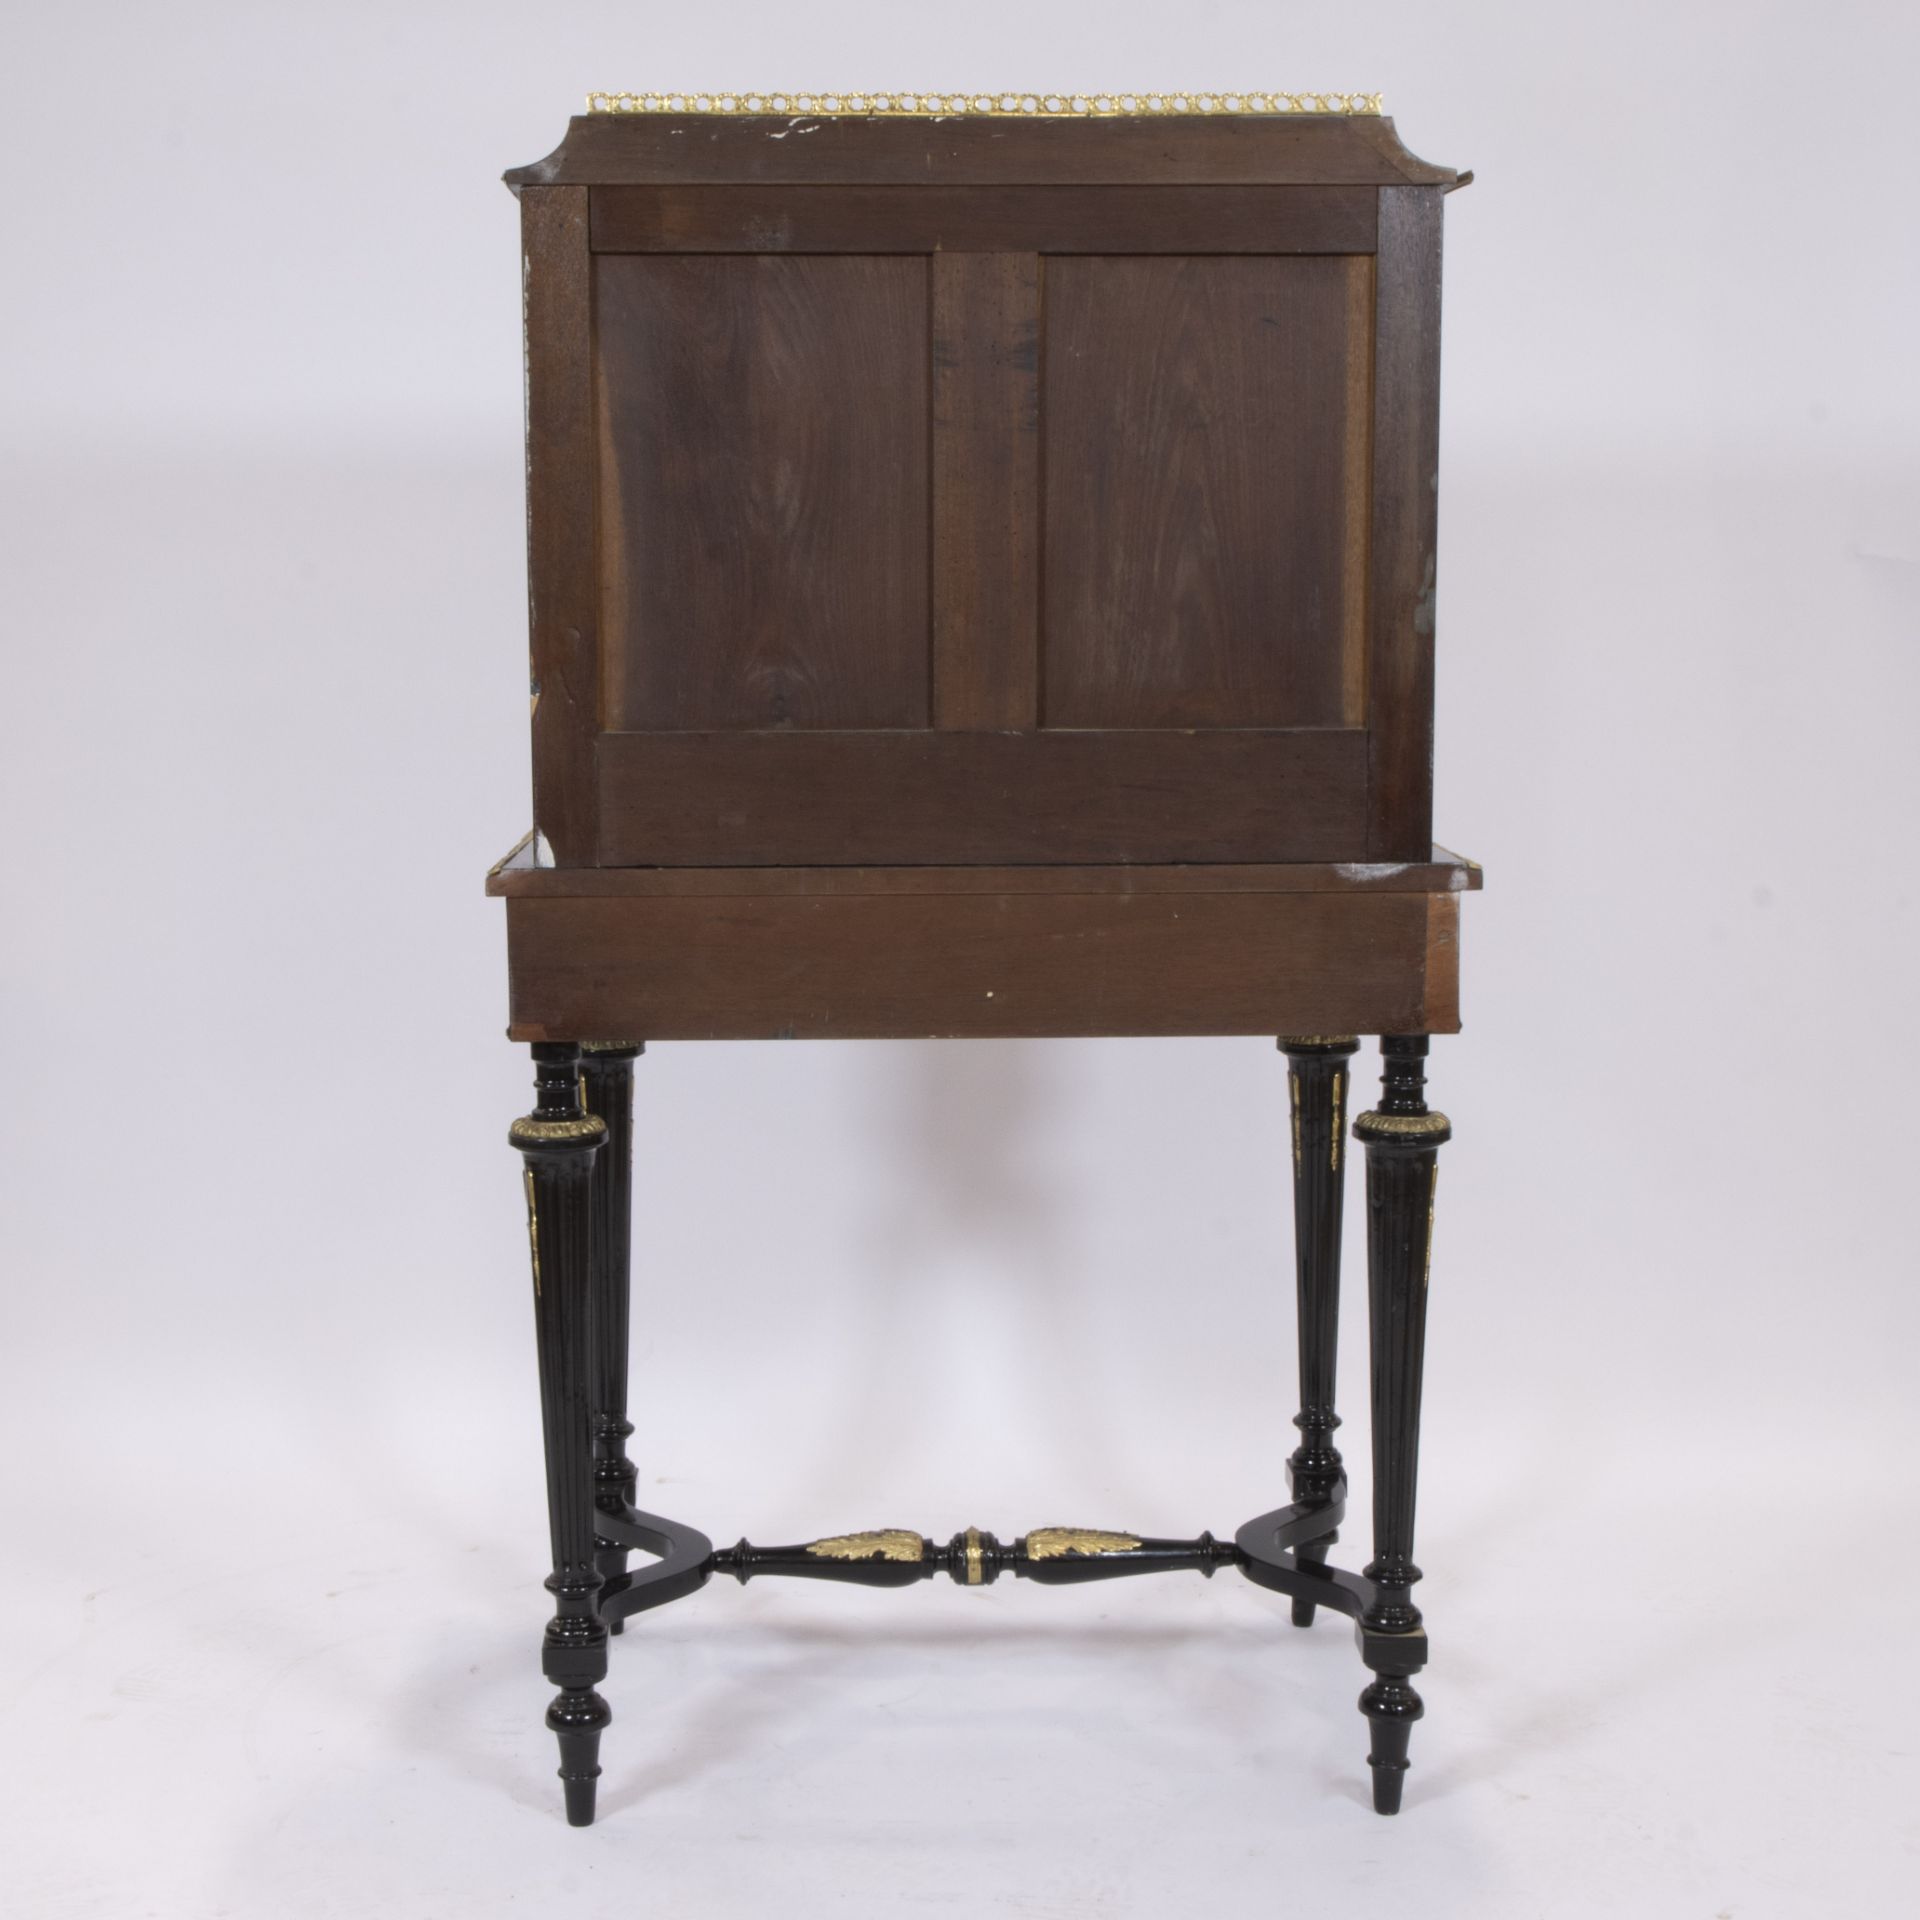 Black lacquered furniture Napoleon III Bonheur du Jour with gilt bronze fittings - Image 3 of 5